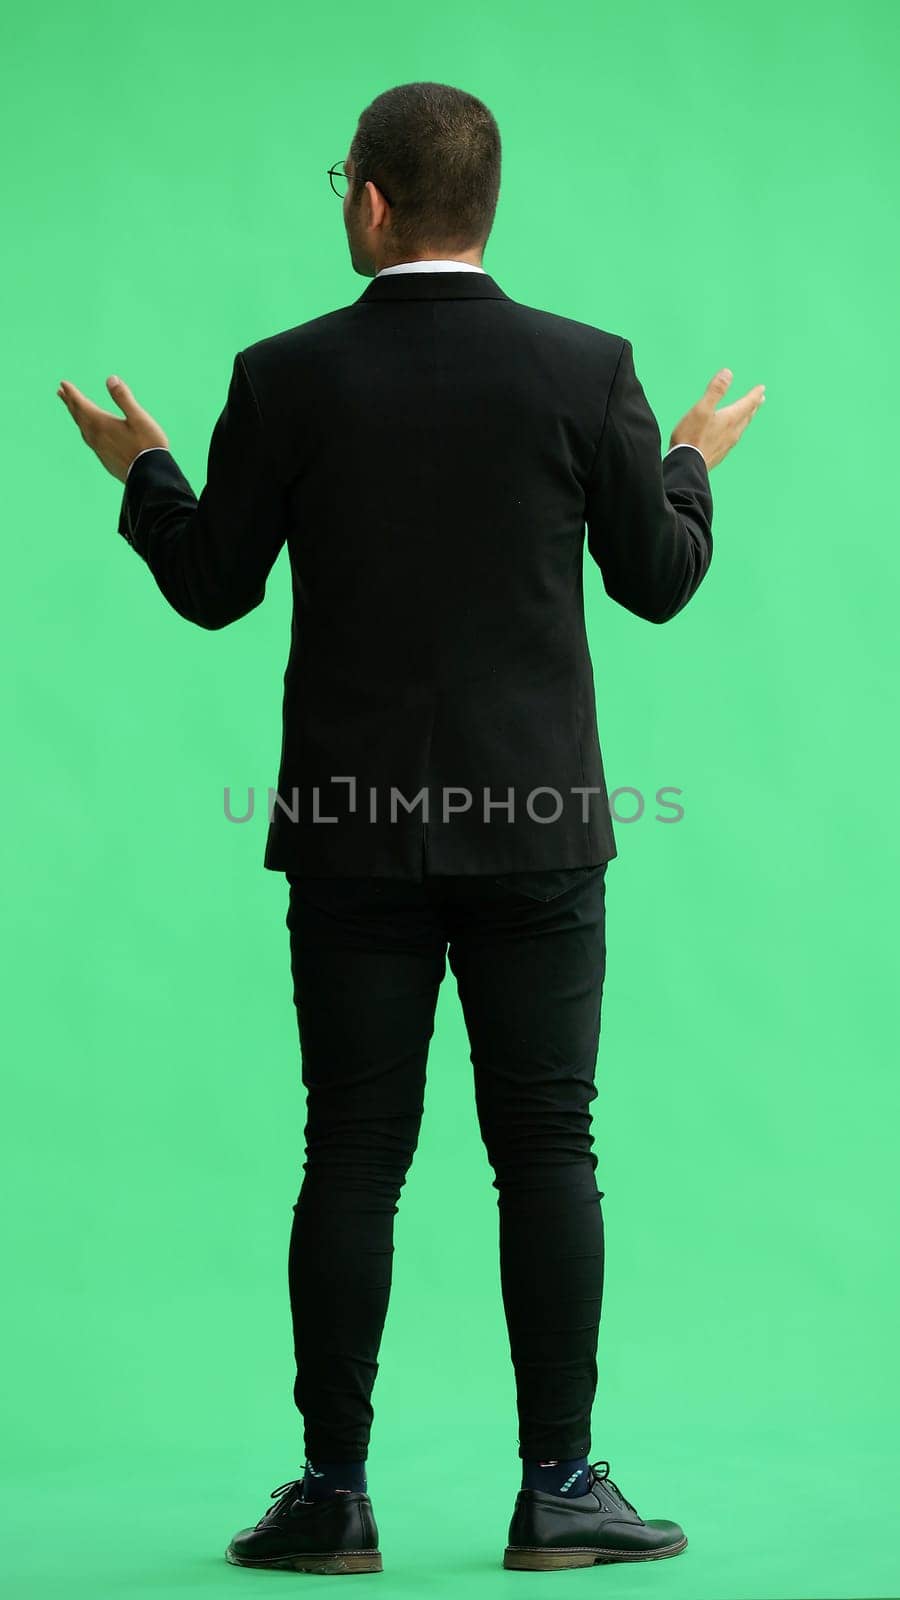 young man in full growth. isolated on green background demonstrates with hands by Prosto